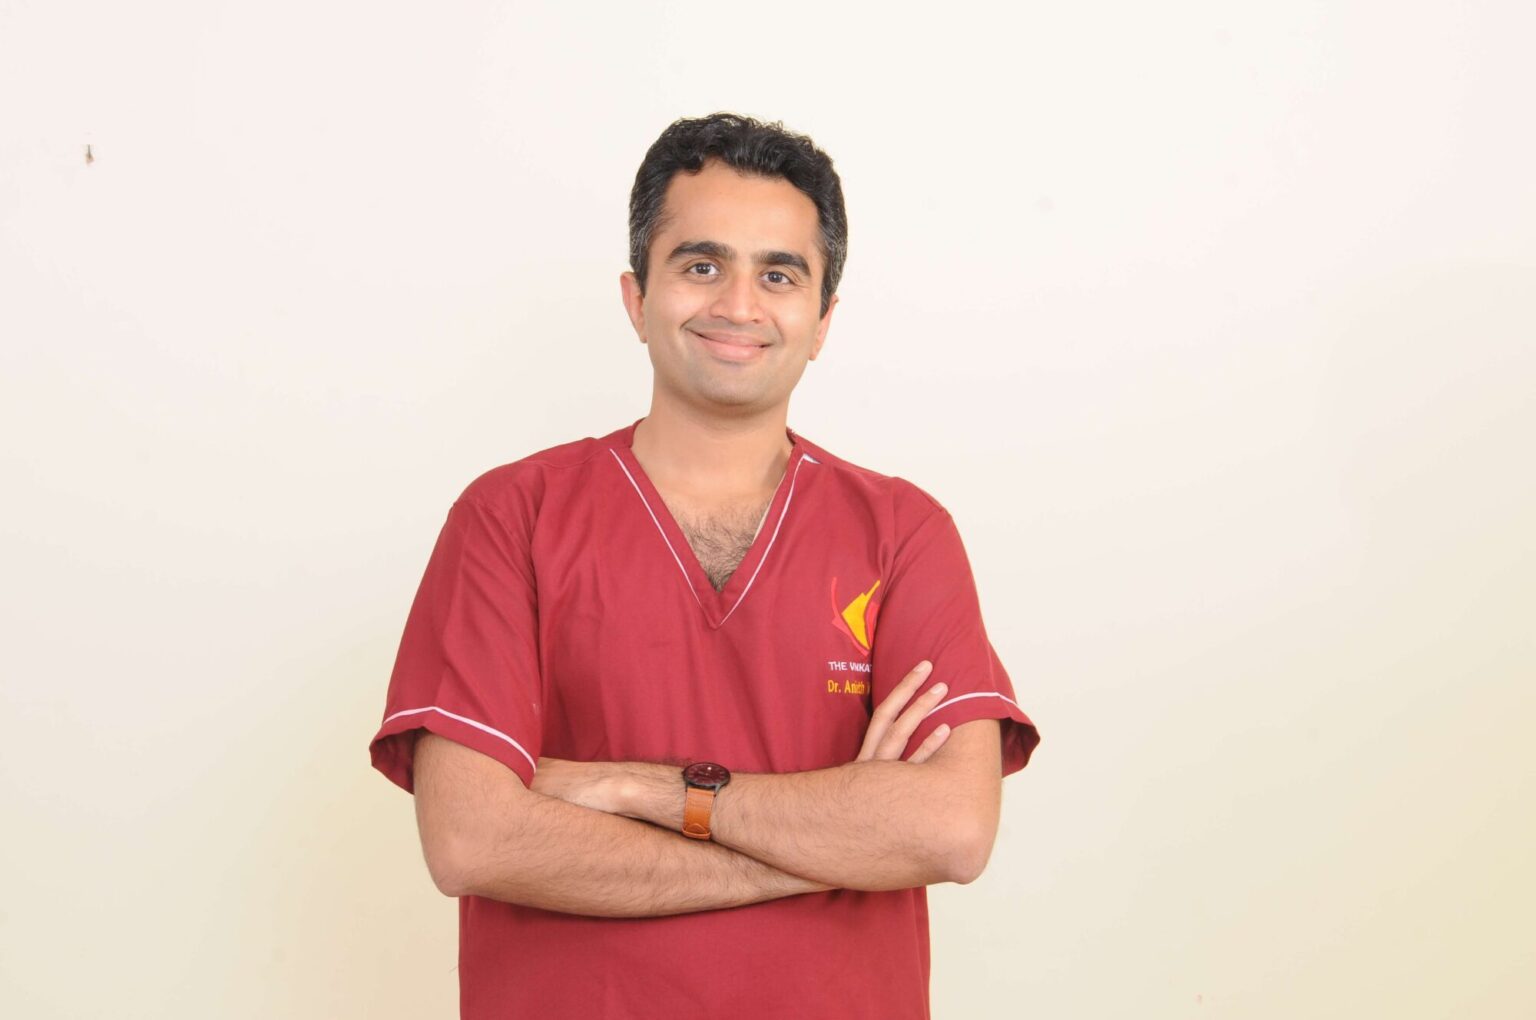 Dr. Aniketh is the most highly trained plastic surgeon